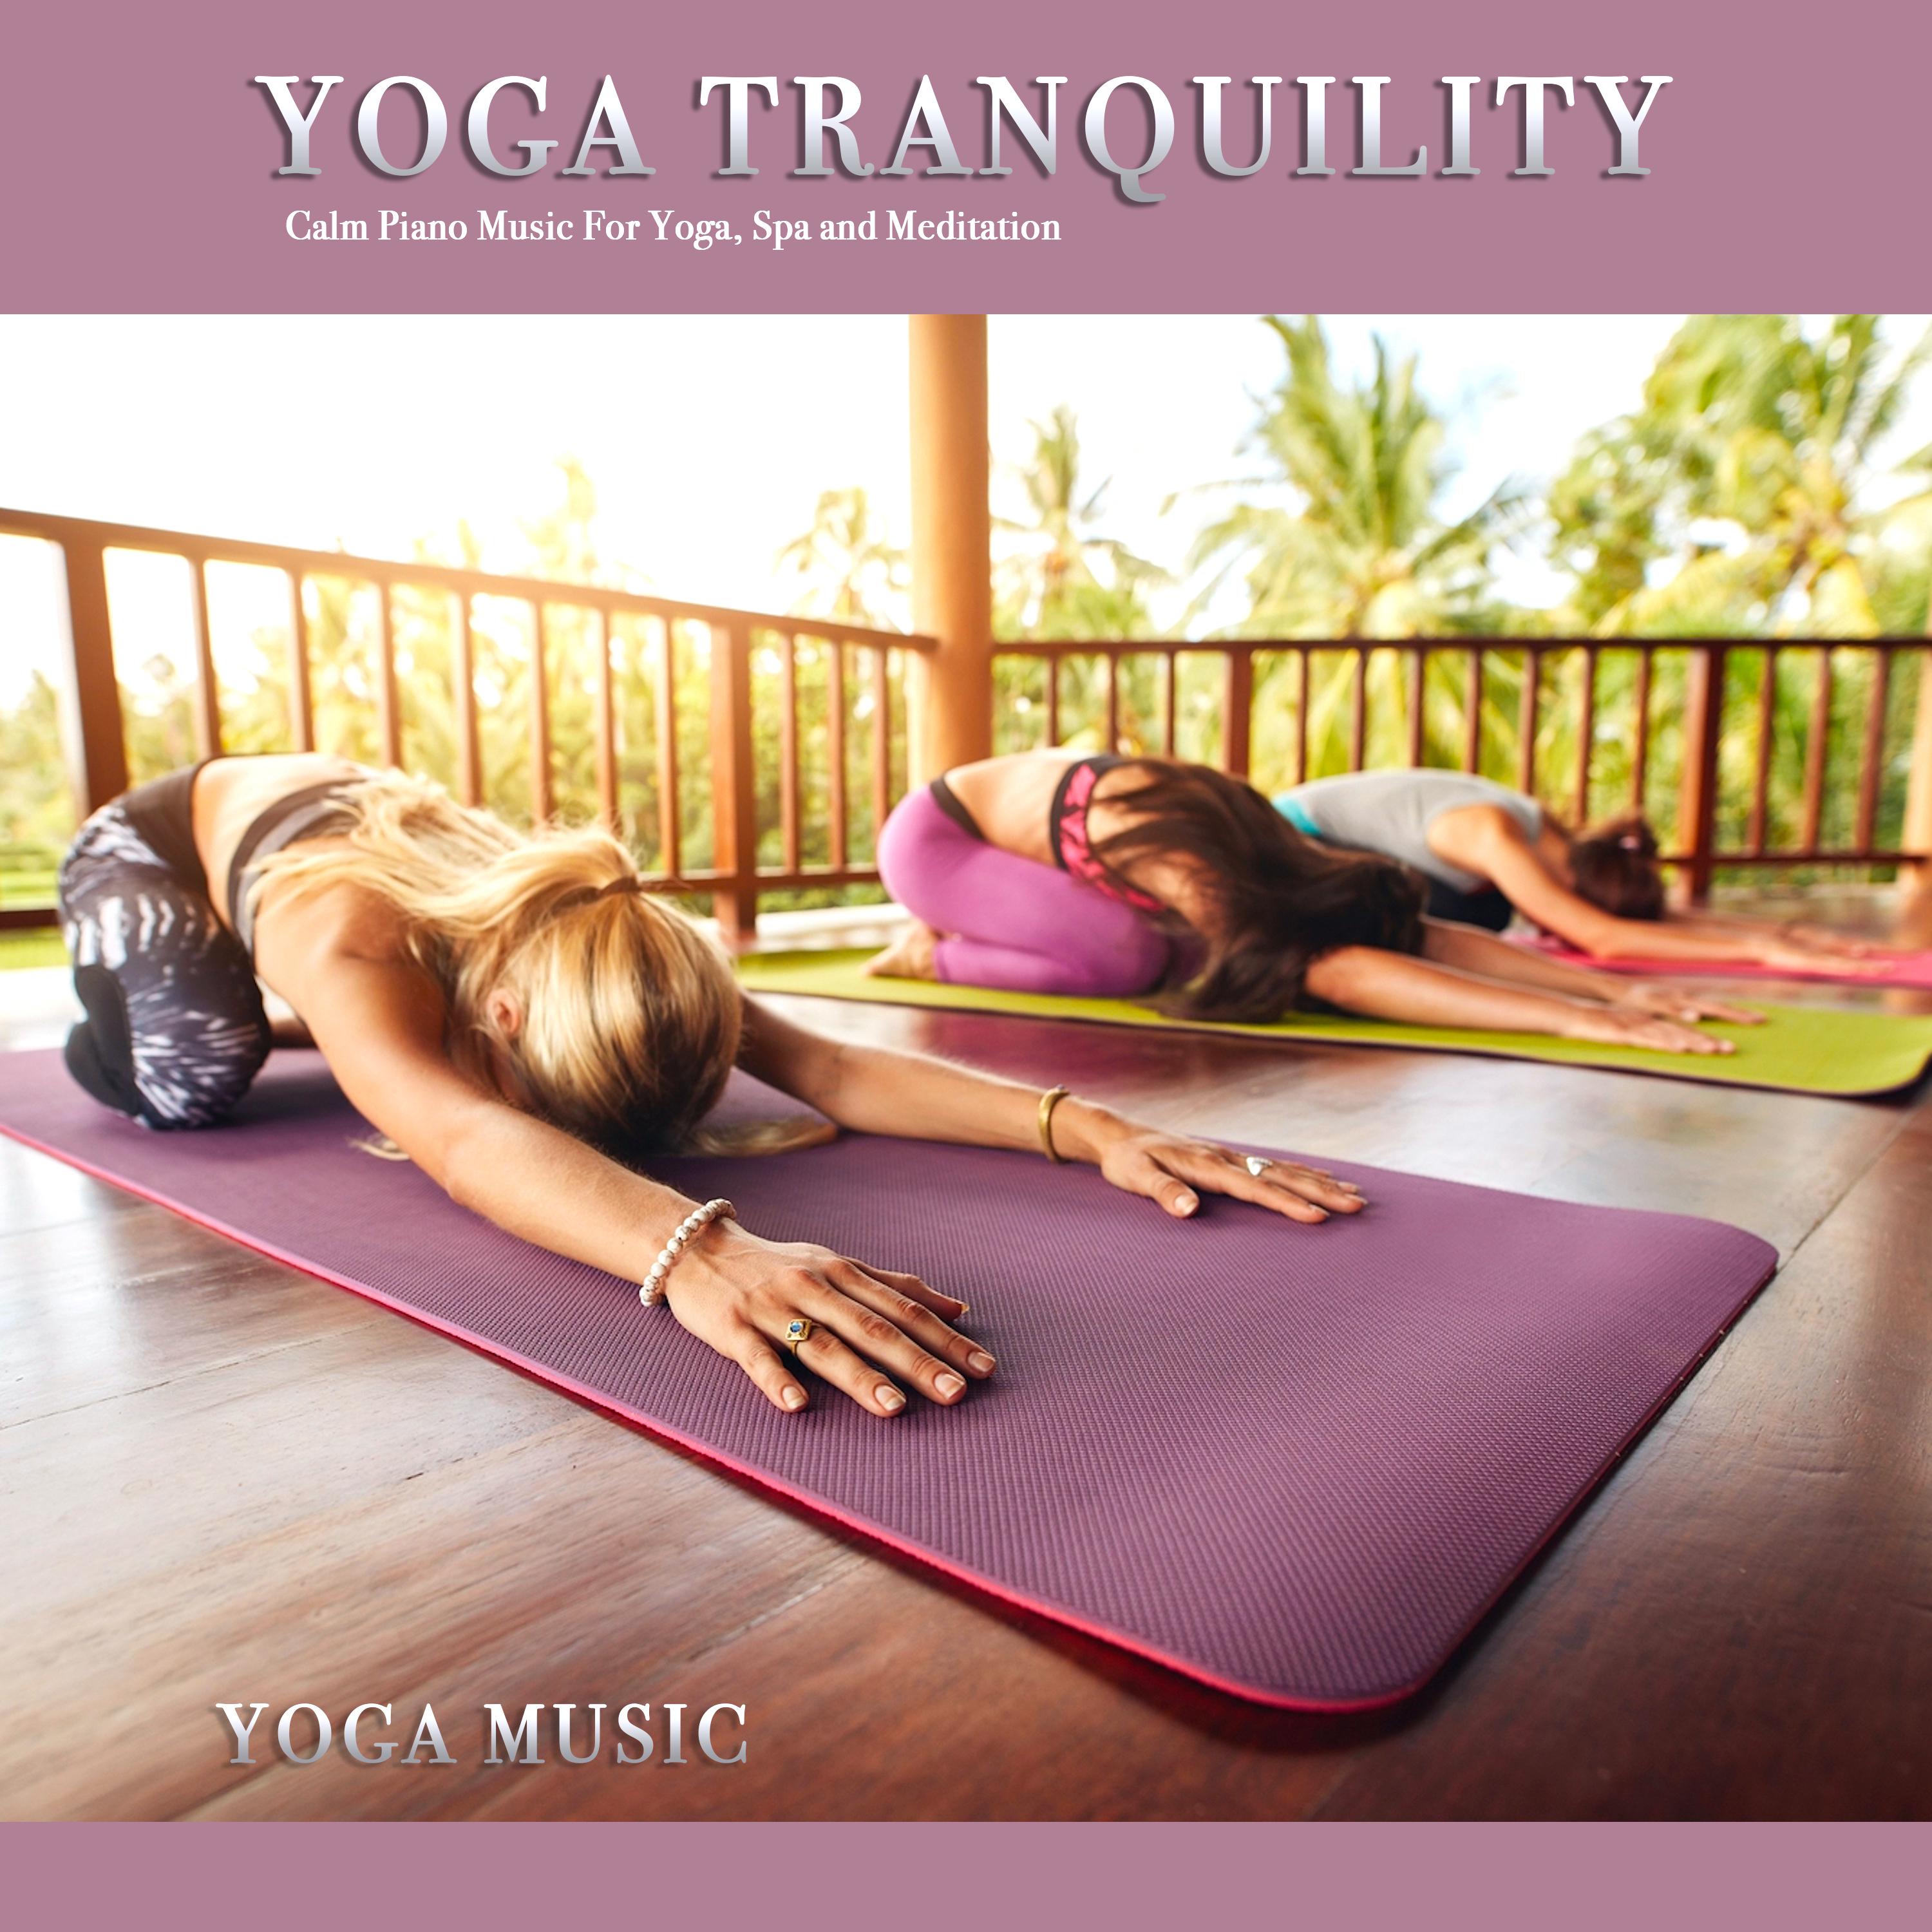 Yoga Tranquility: Calm Piano Music For Yoga, Spa and Meditation